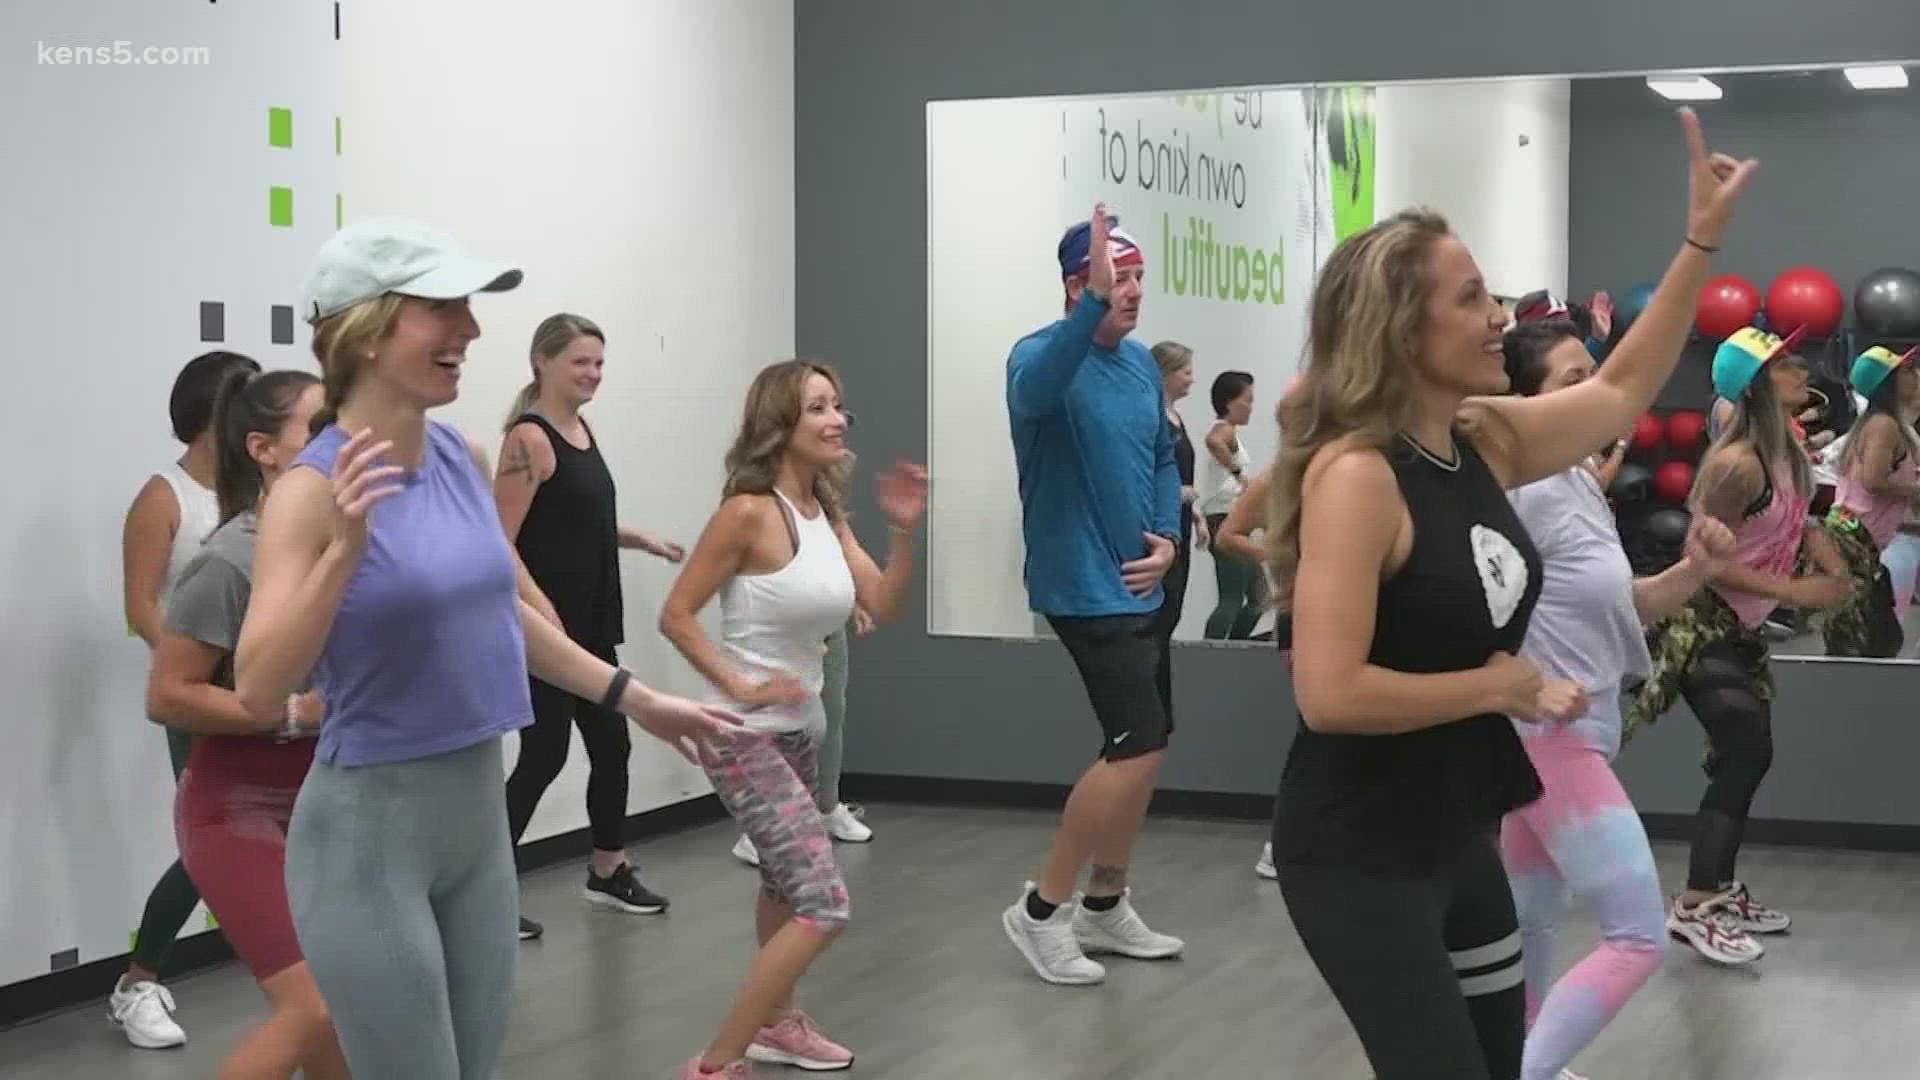 Why workout alone when you can workout with your friends? This week, Holly and Bill did a Zumba class. Here's how it went!